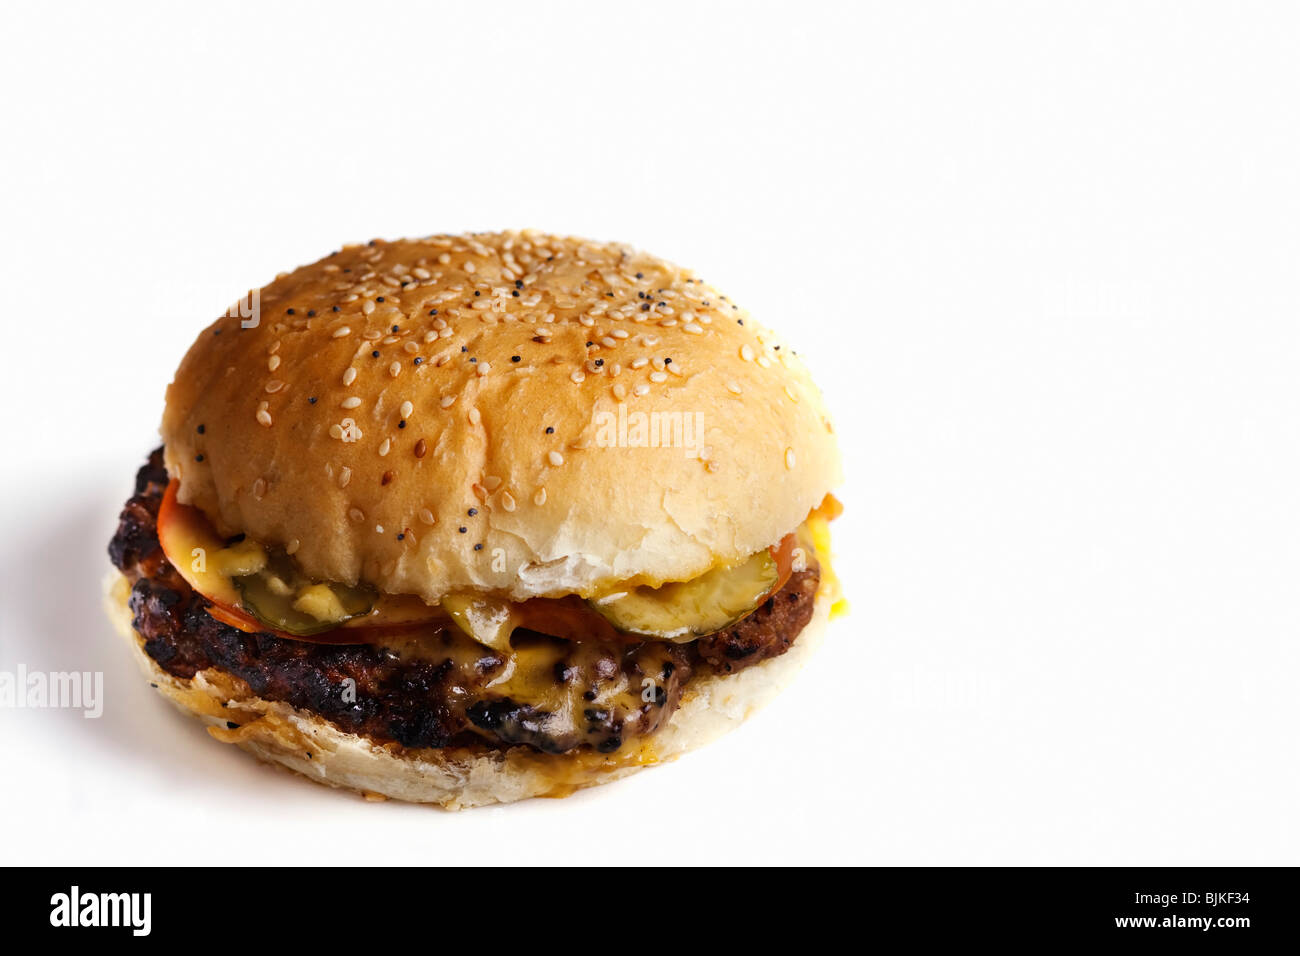 Cheeseburger. Isolated. Copy space. Stock Photo